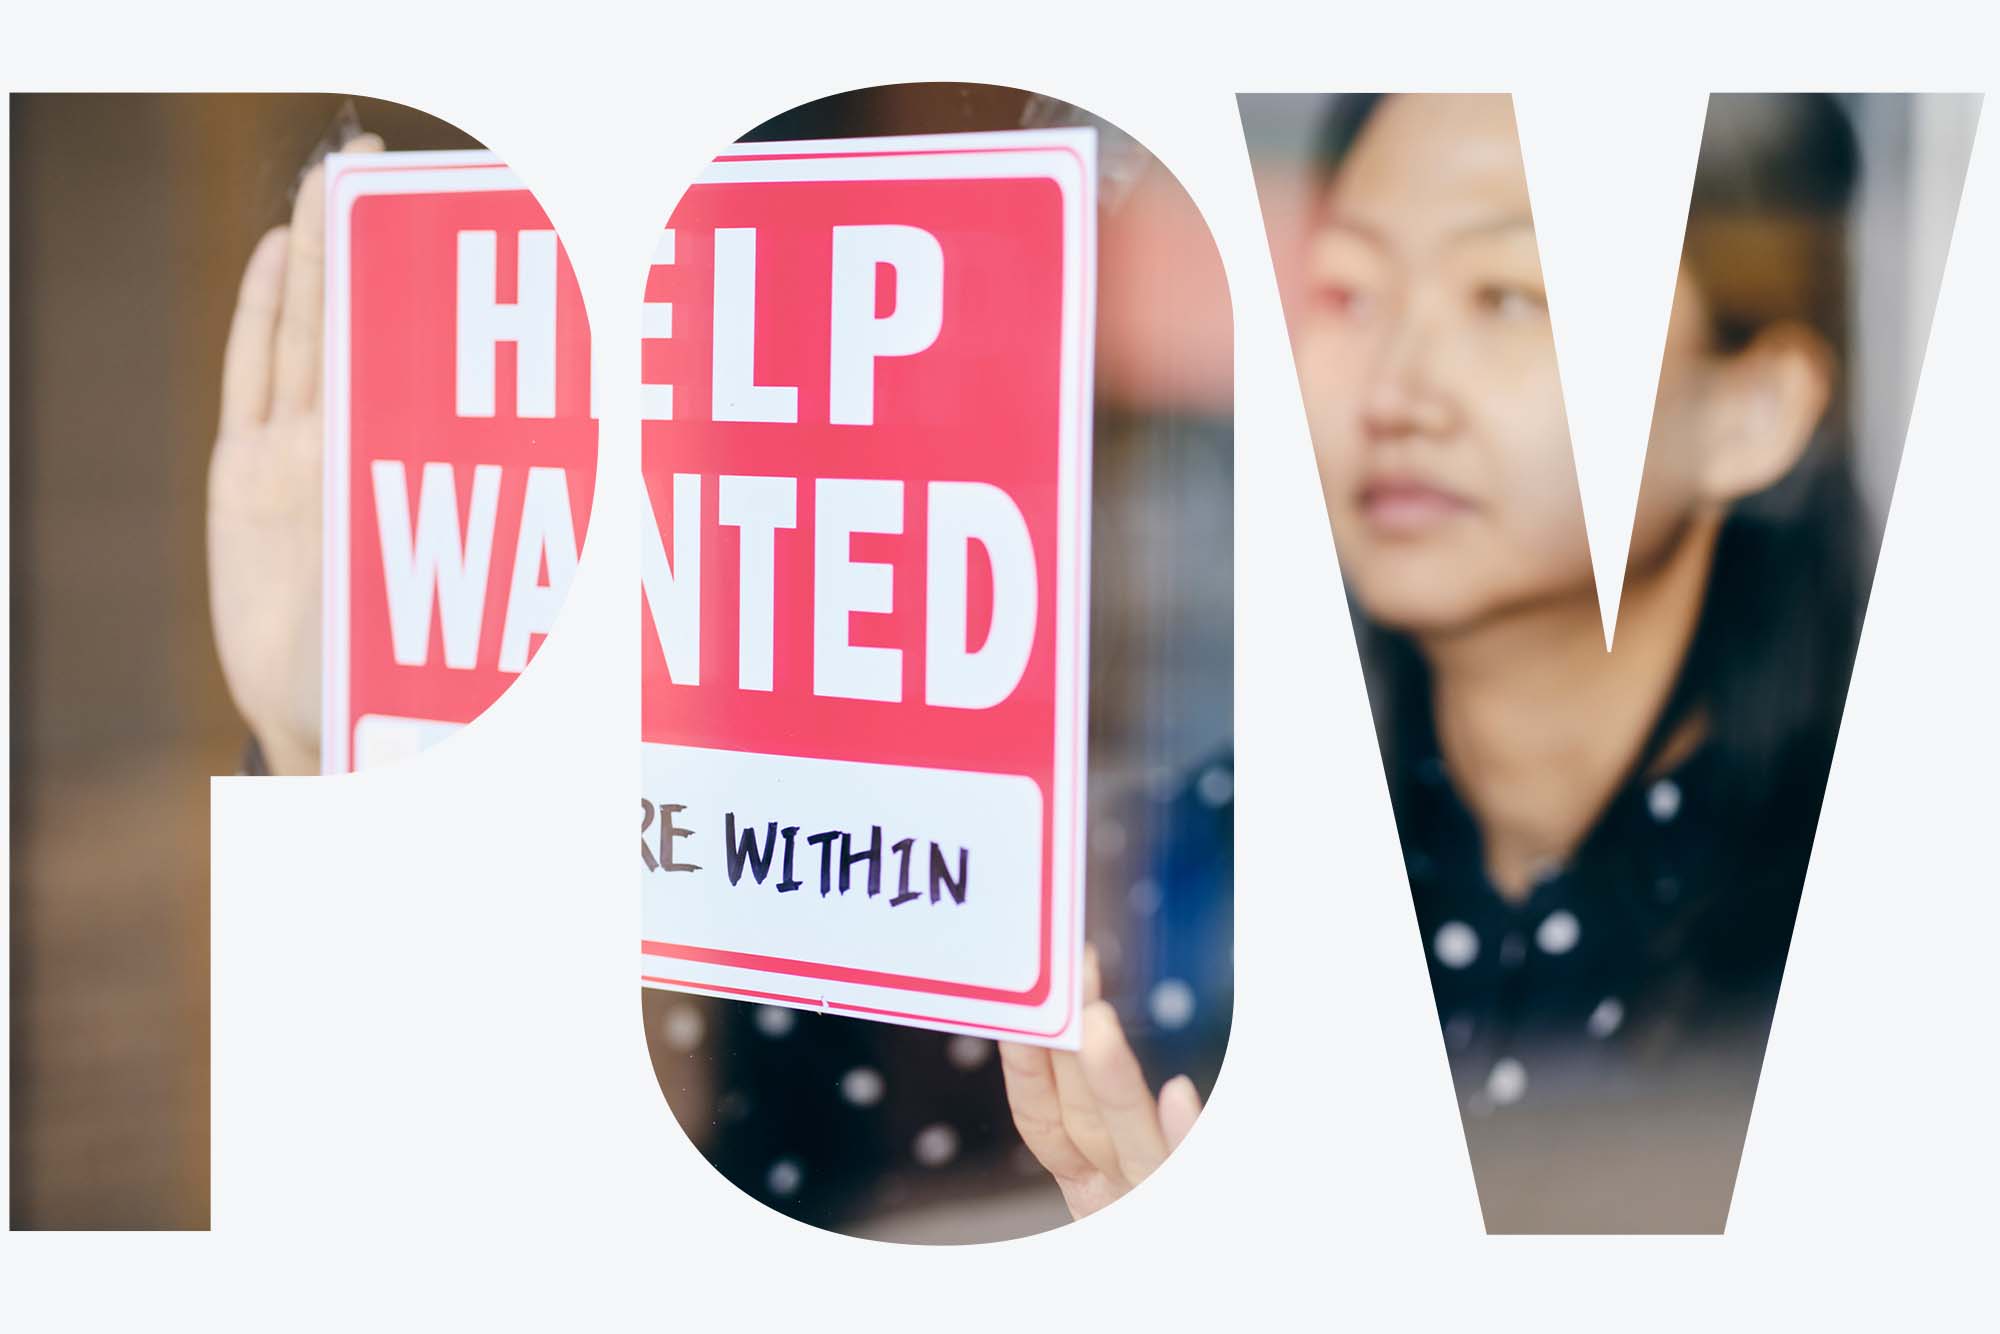 Photo of an Asian woman business owner putting up a help wanted sign in her store window. The letters "POV" are overlaid over the image